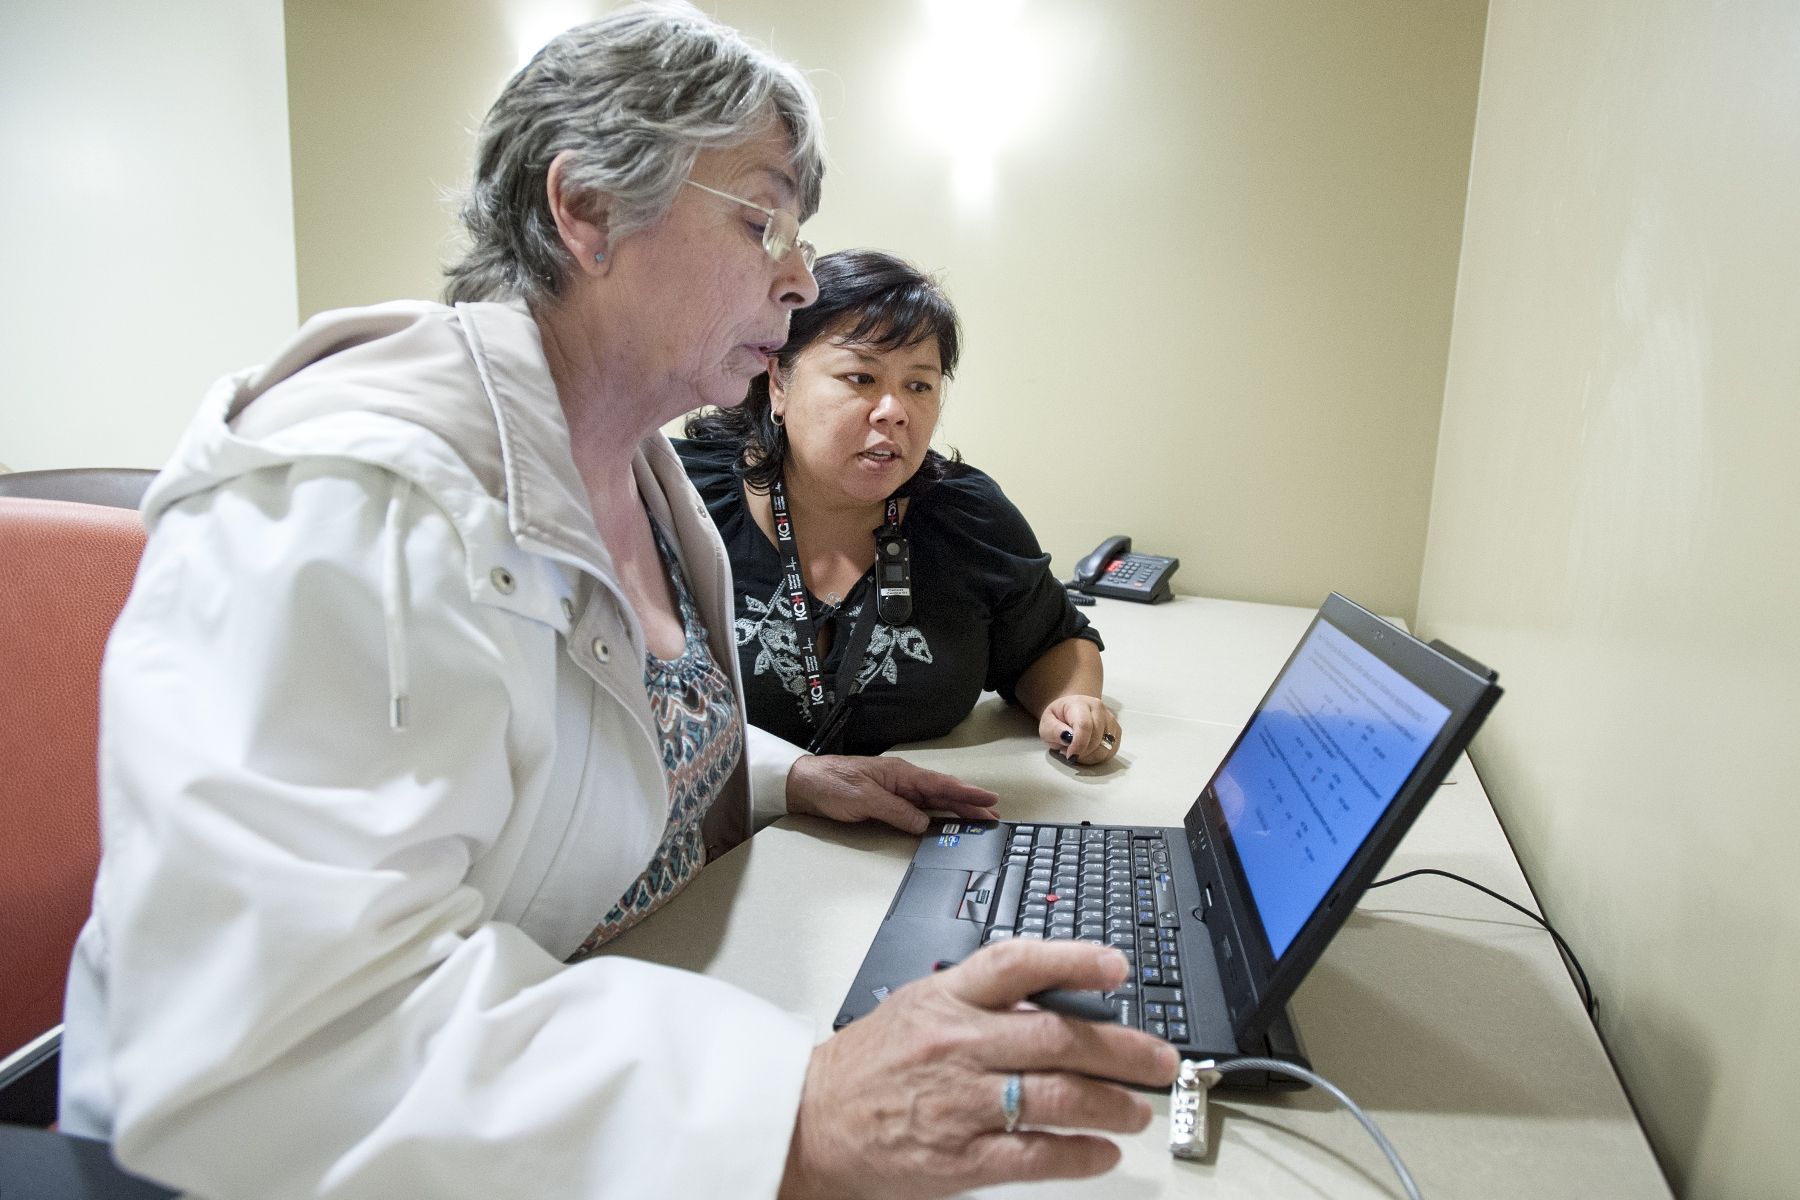 Nurse helping patient, follow up appointment, cancer care, evaluation